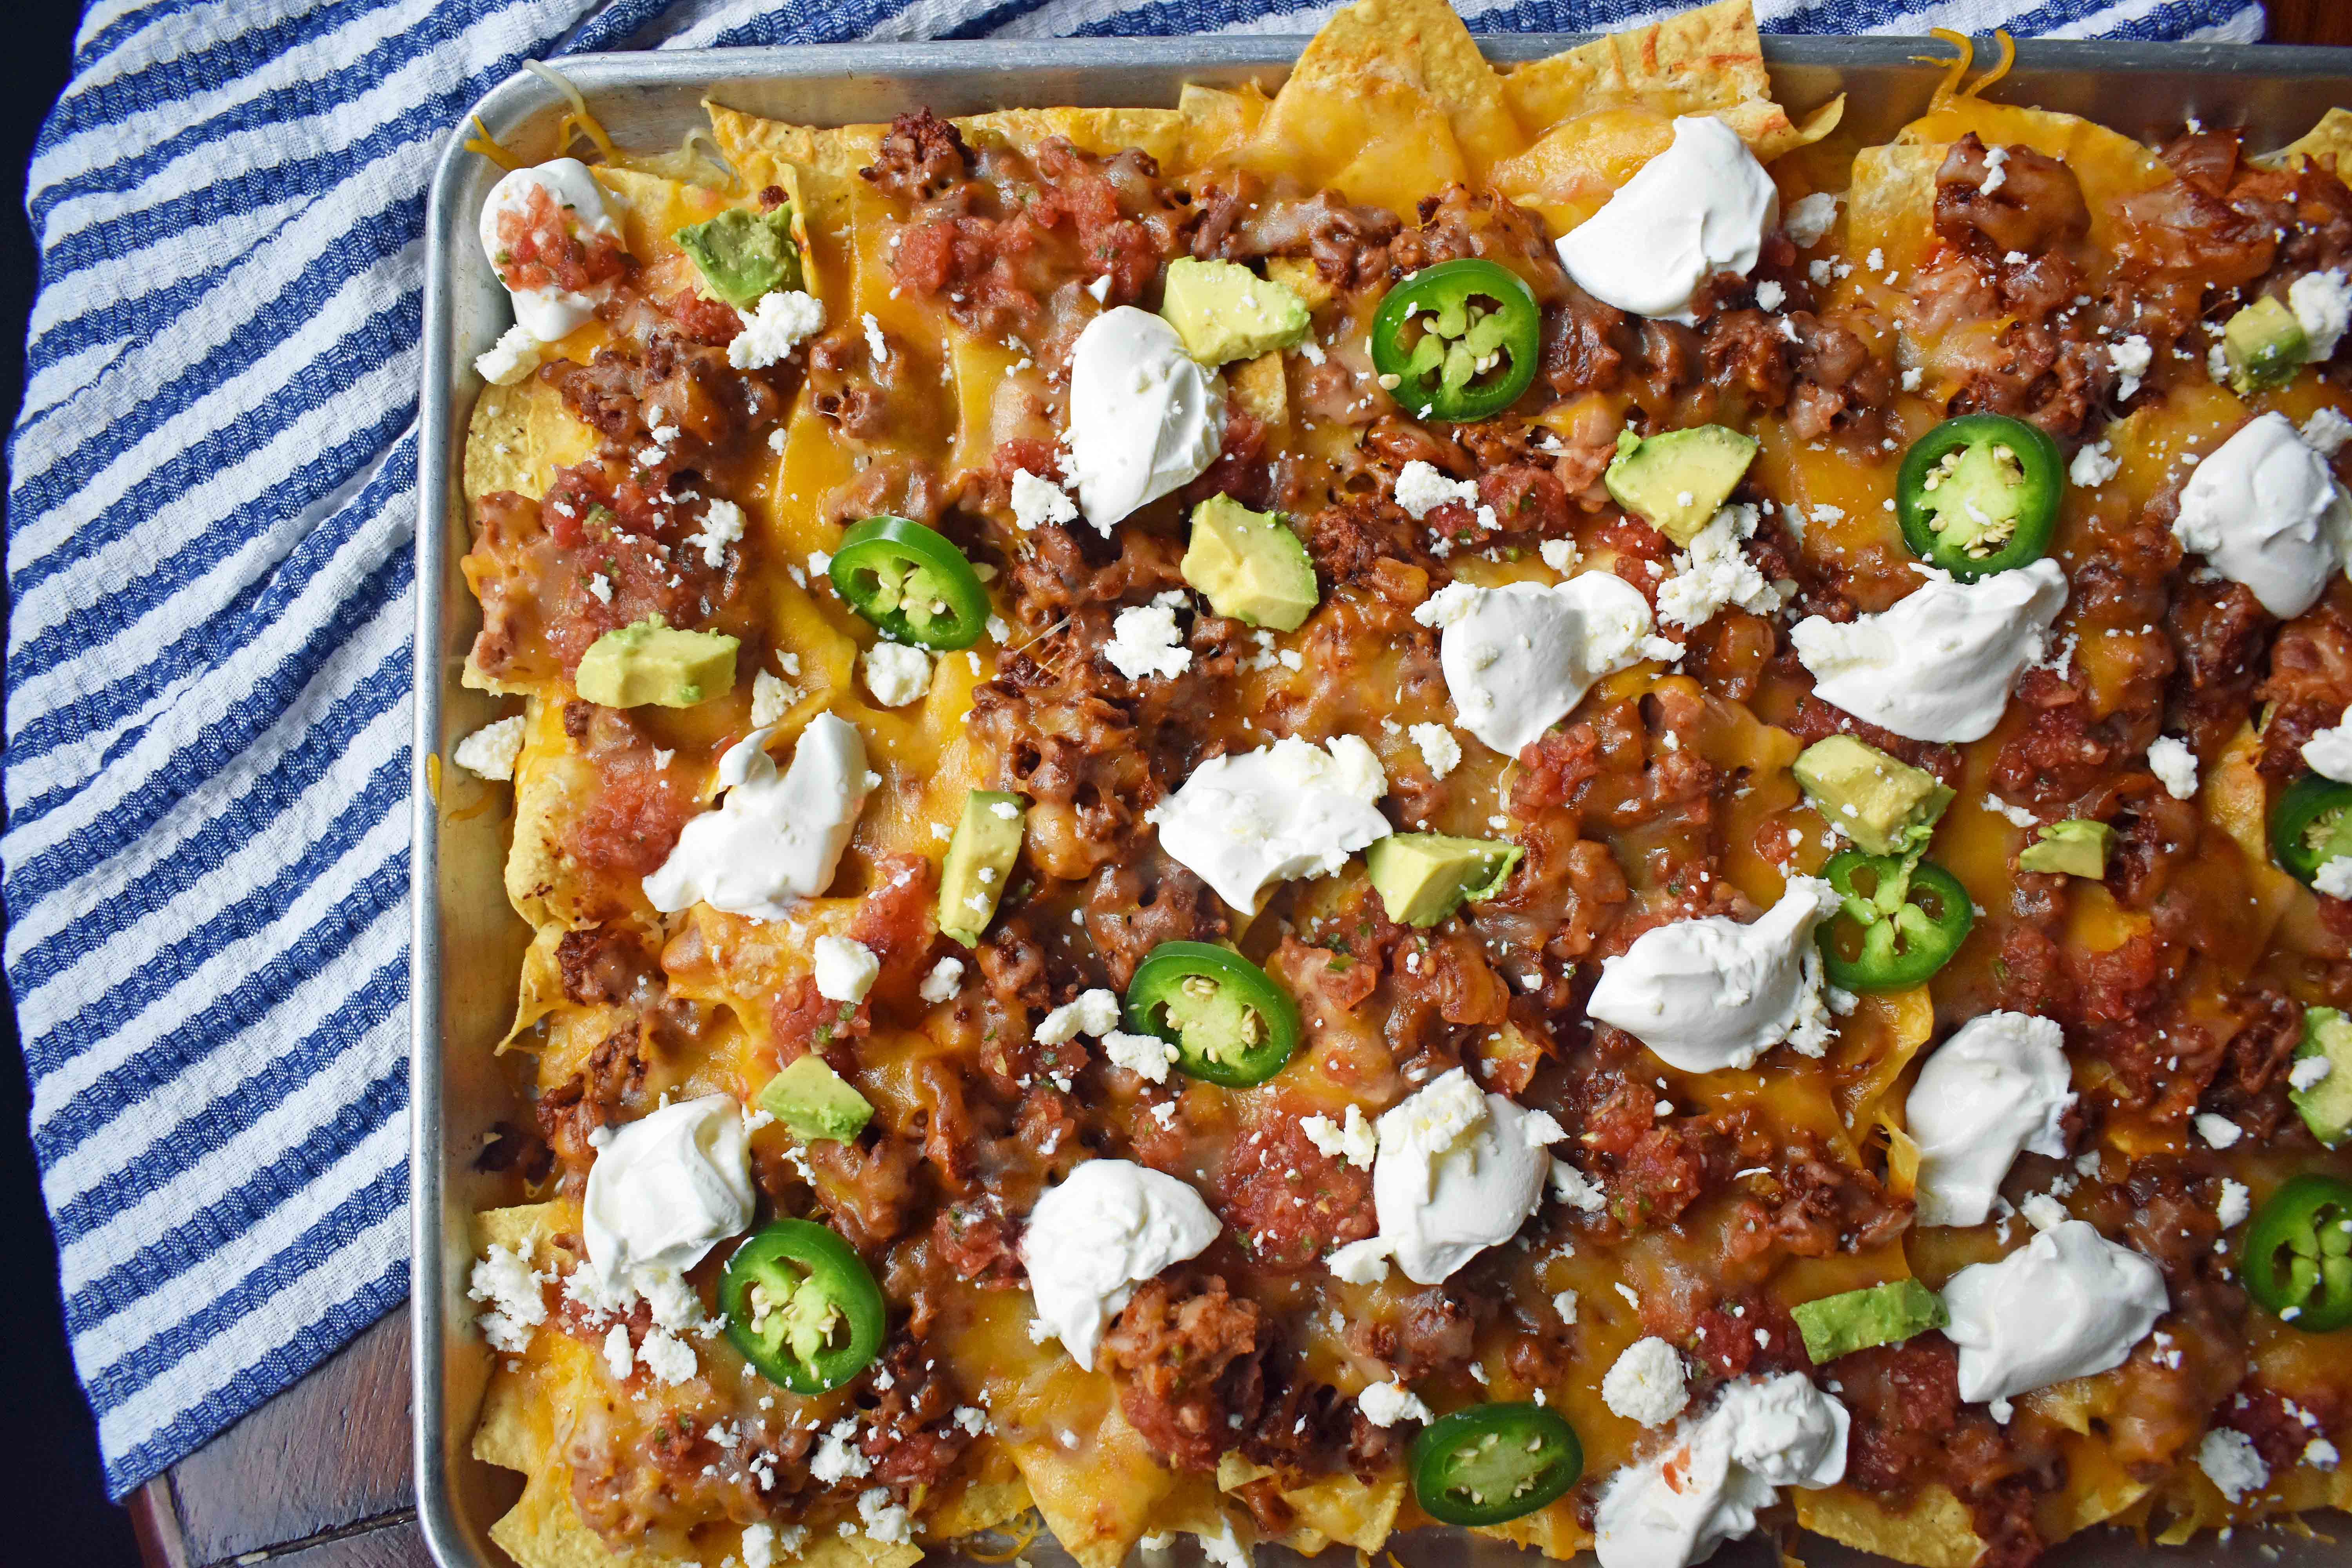 Ultimate Spicy Beef Nachos by Modern Honey. Layers of spicy beef, refried beans, mexican cheese, sour cream, avocado, and jalapenos. These are the perfect party snack for your next party!